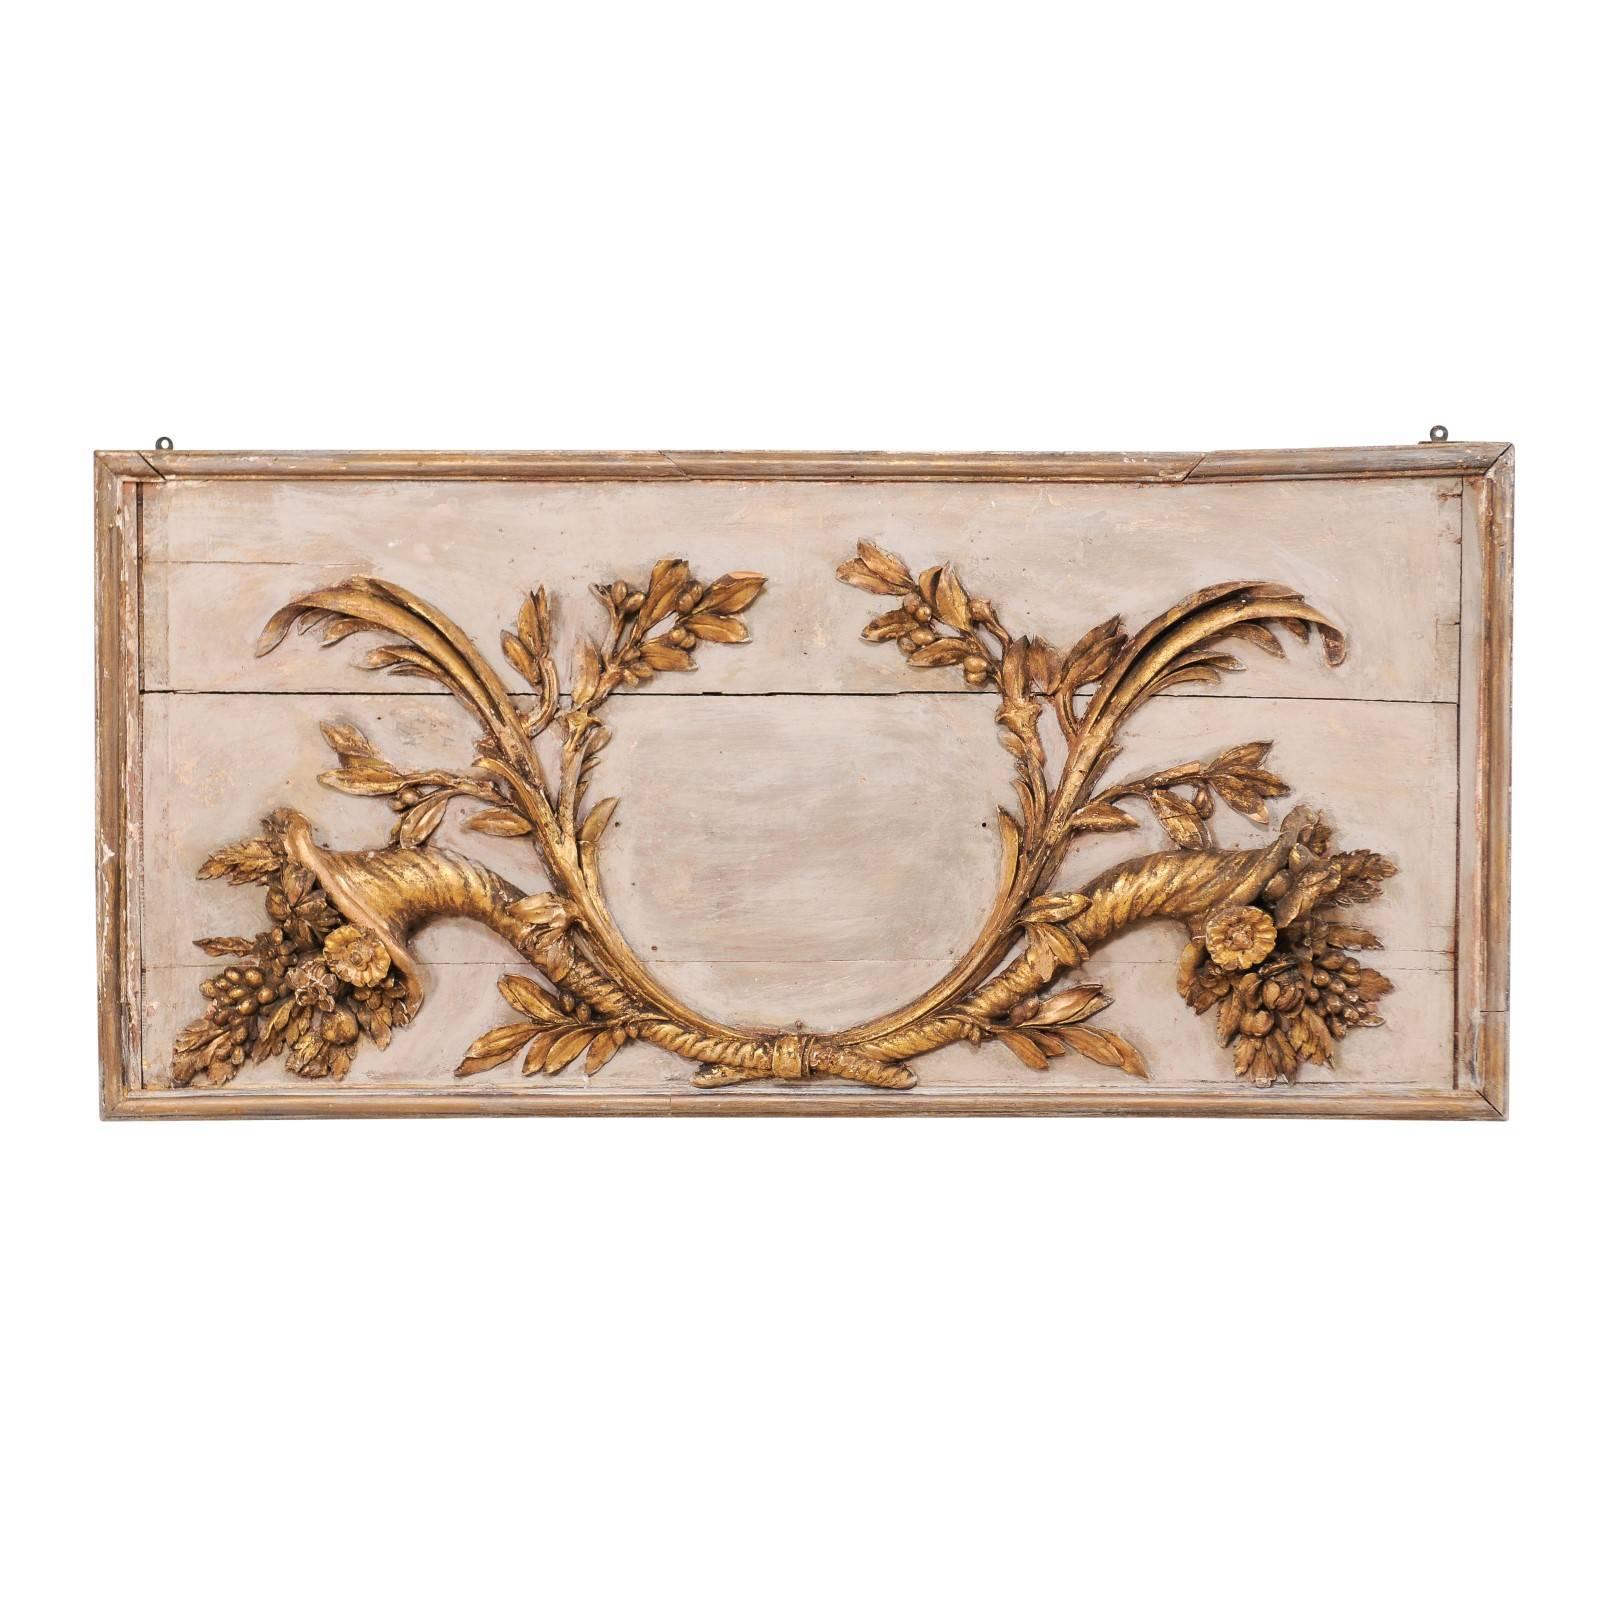 18th Century Italian Wood Carved Wall Plaque with Gold and Bronze Colored Decor